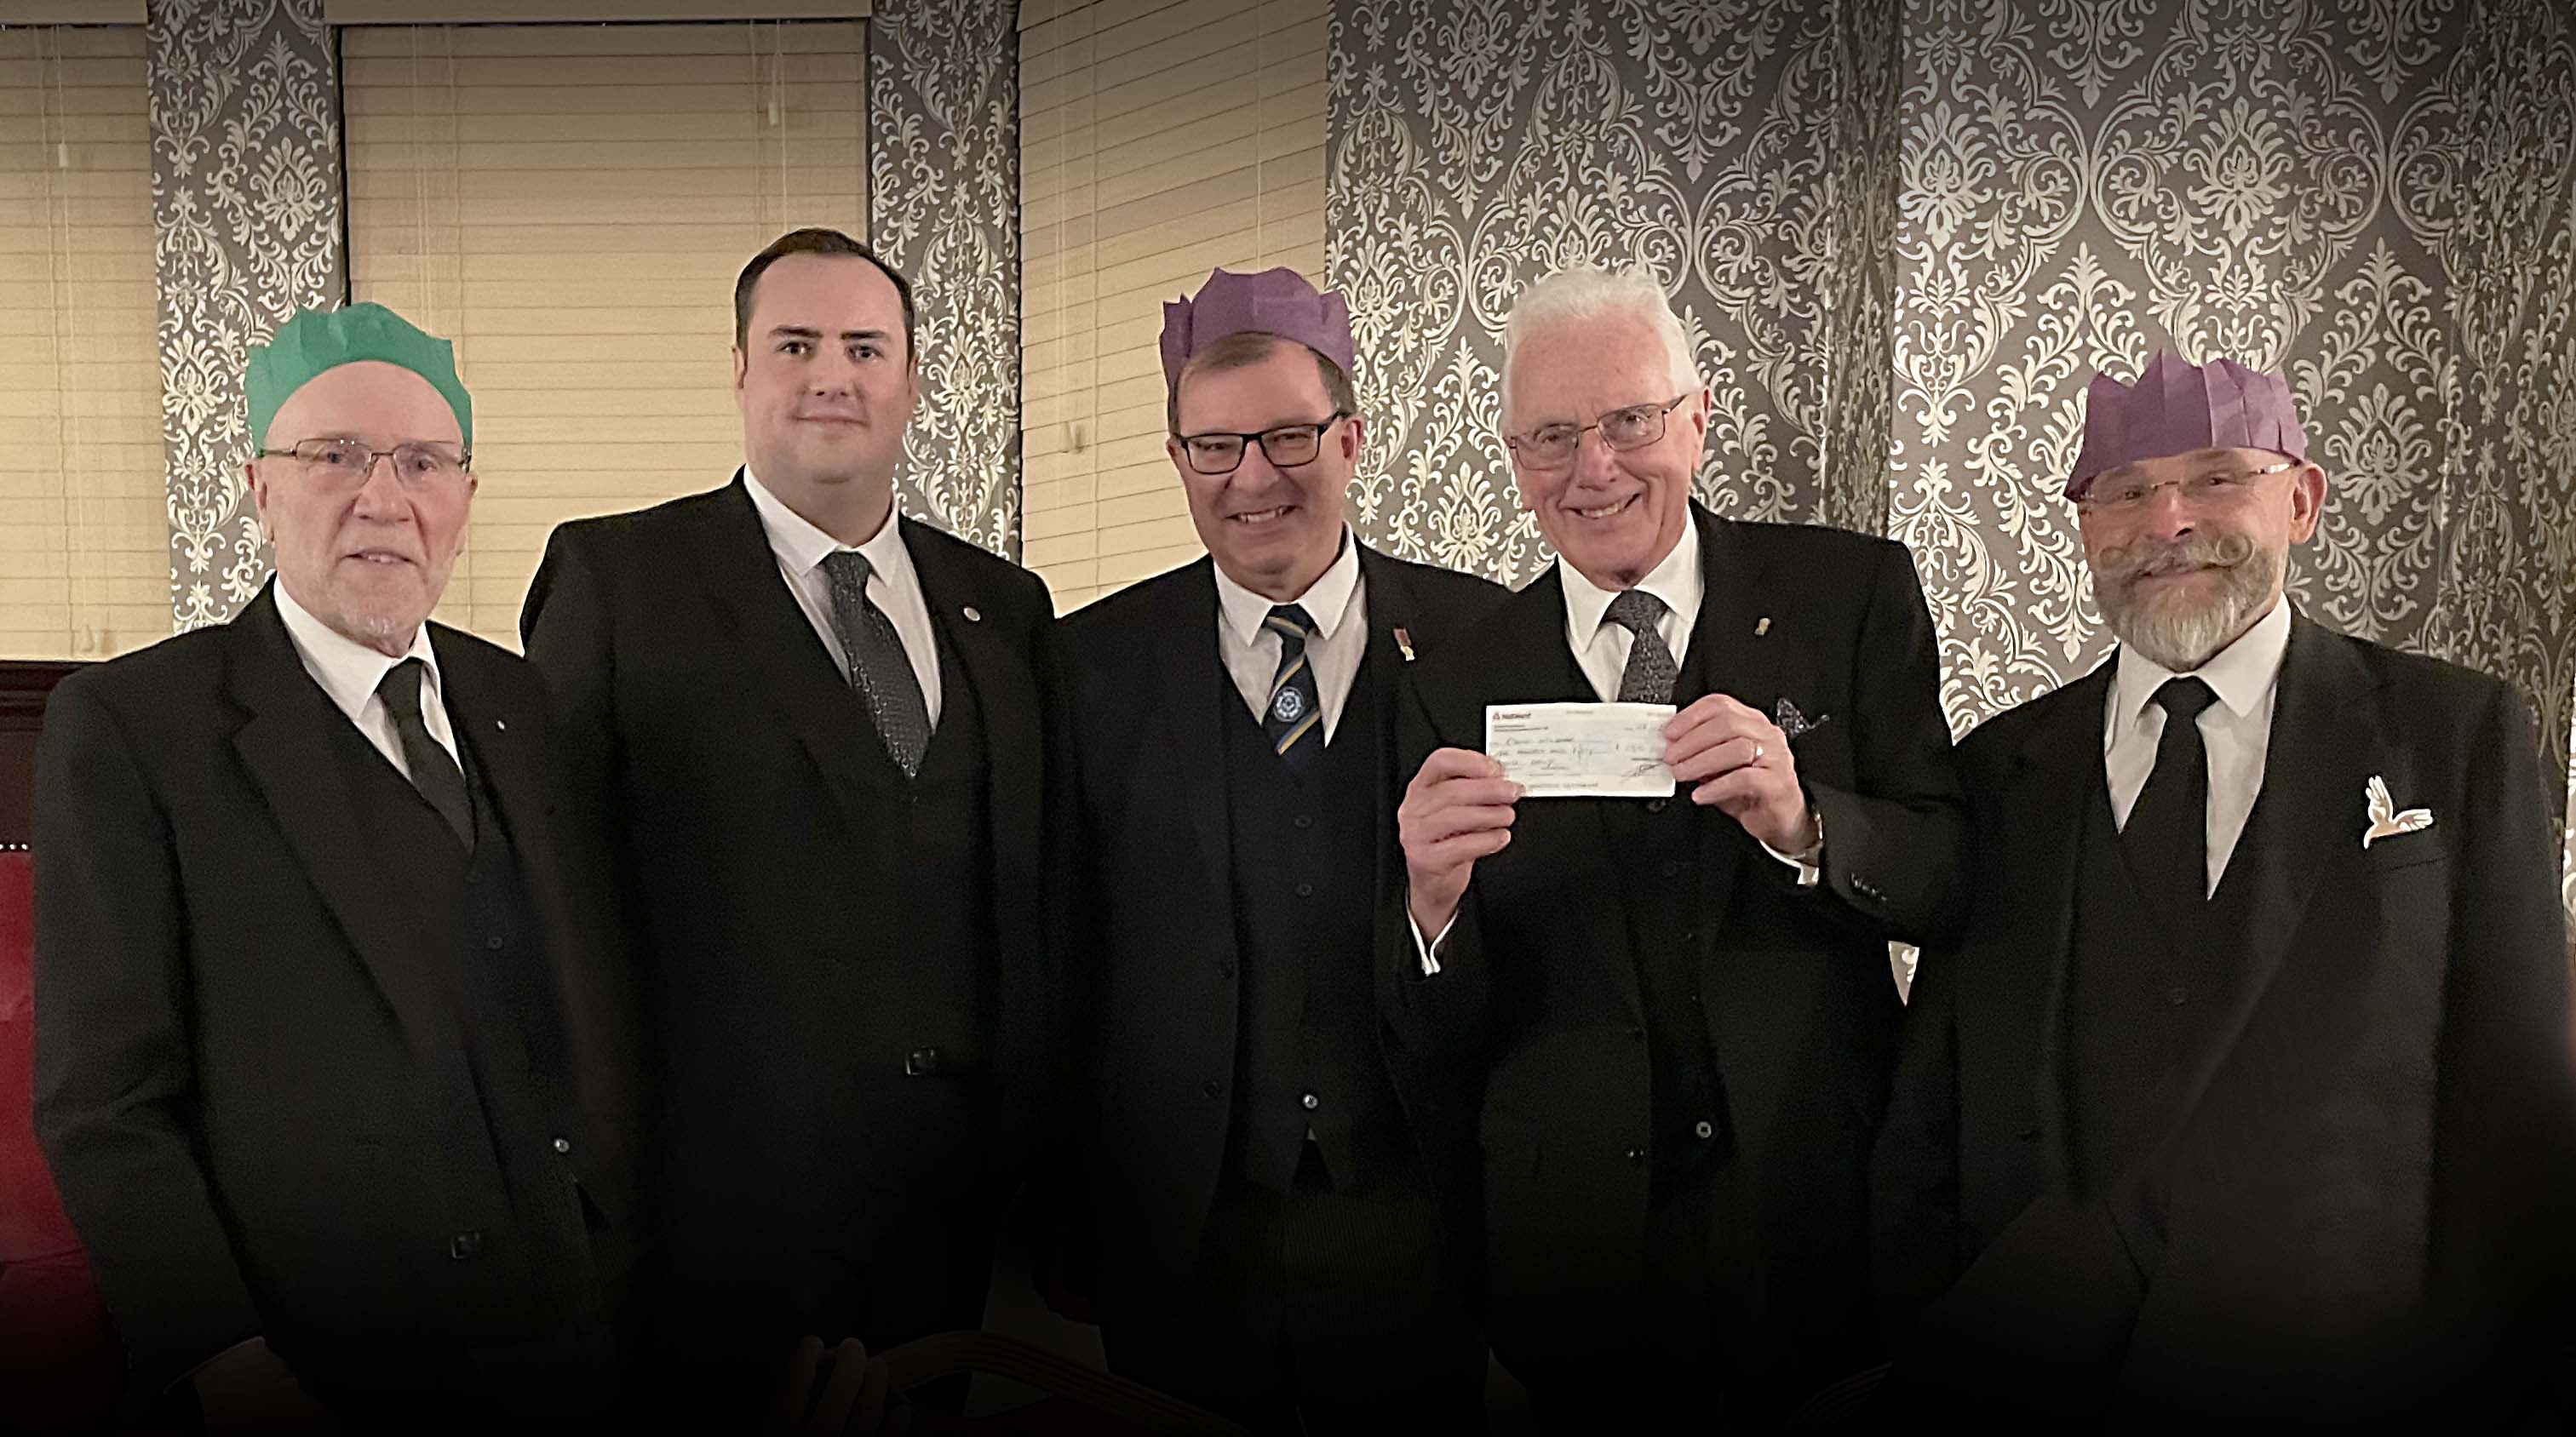 The Master and Treasurer of Vigilantes Lodge presenting a cheque to The Daggards